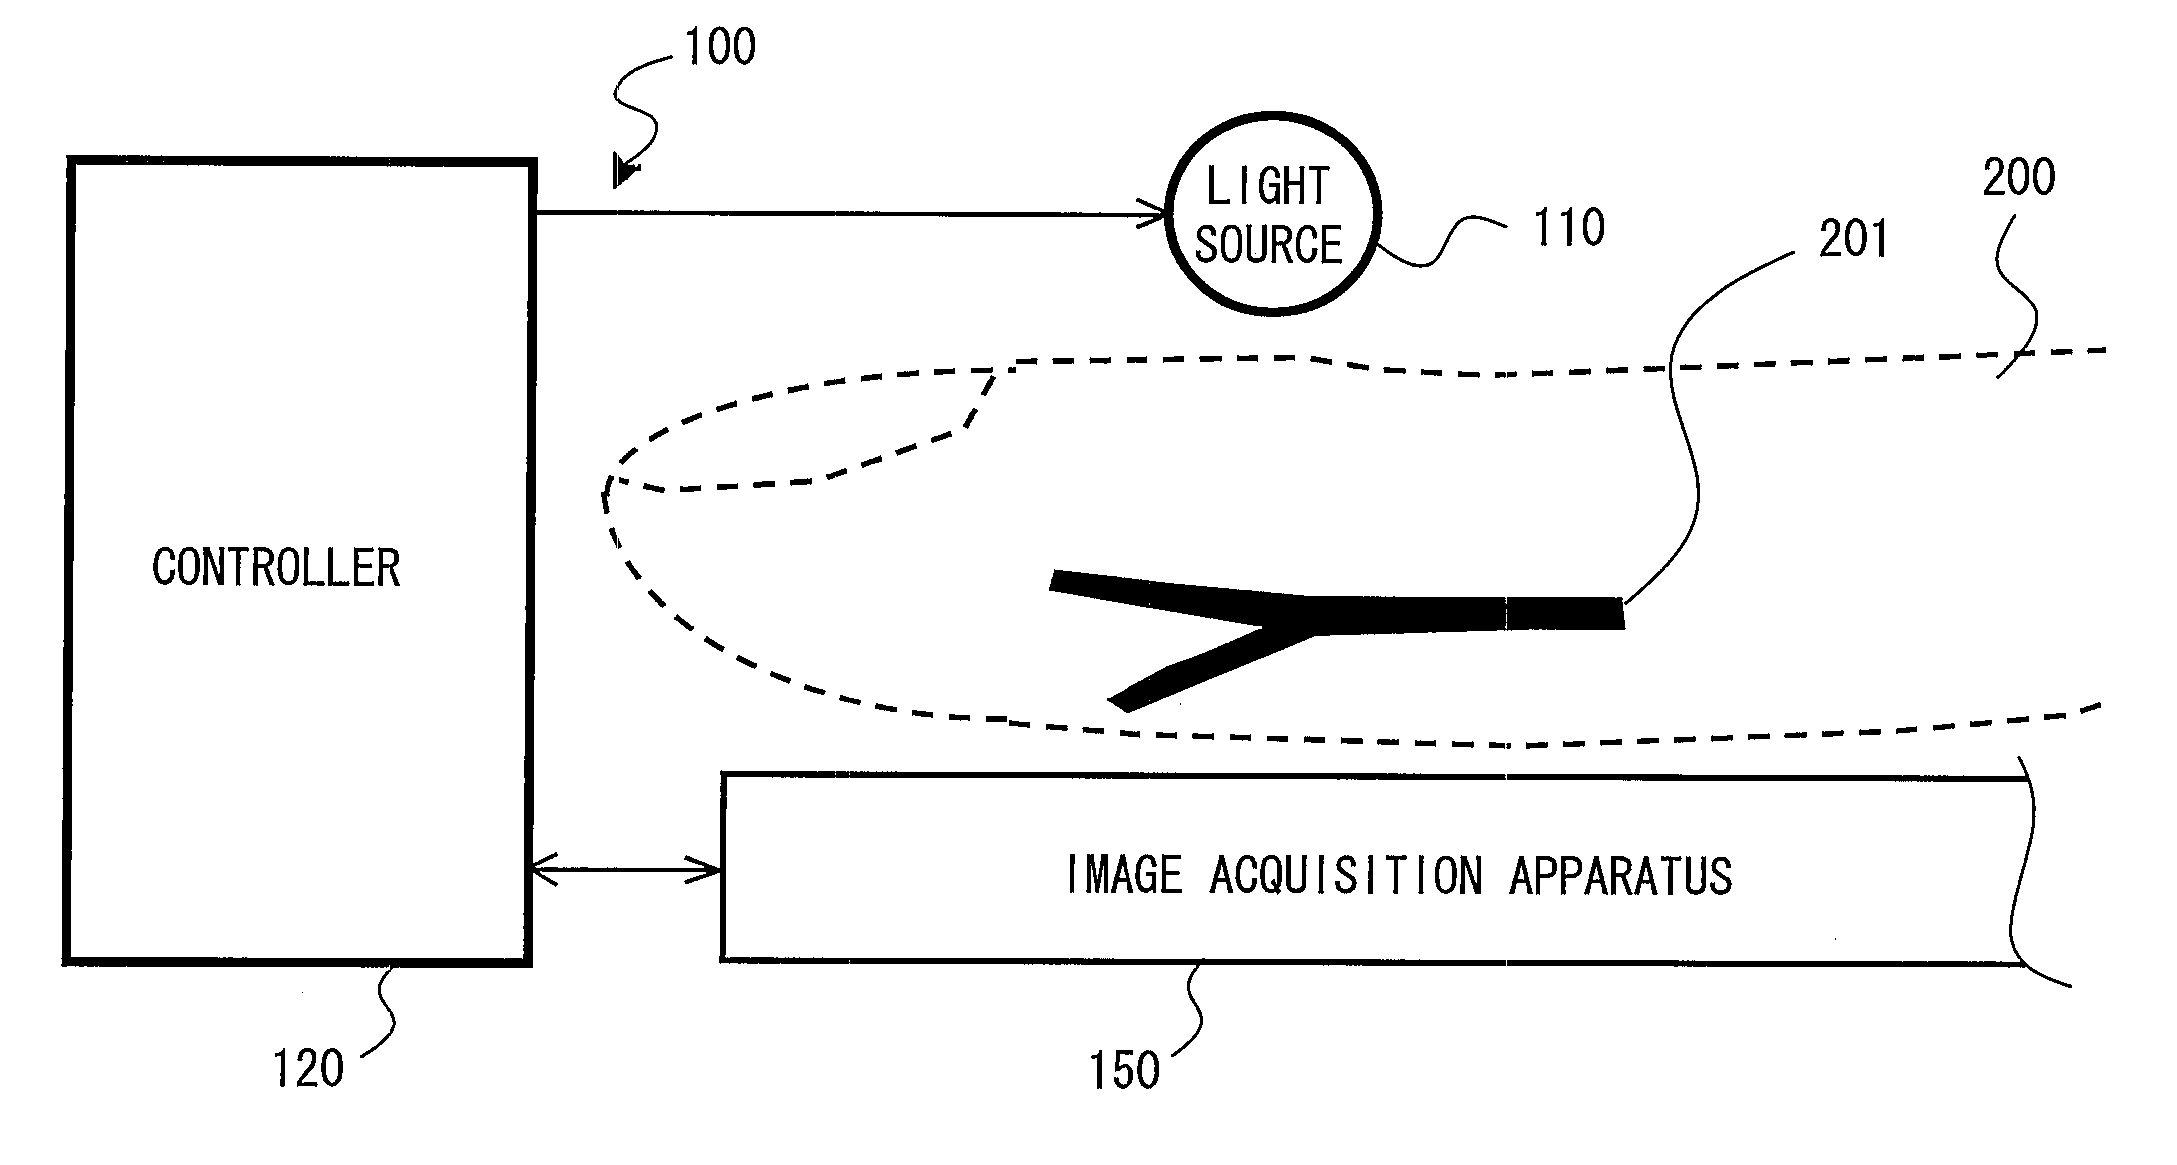 Image acquisition apparatus and biometric information acquisition apparatus